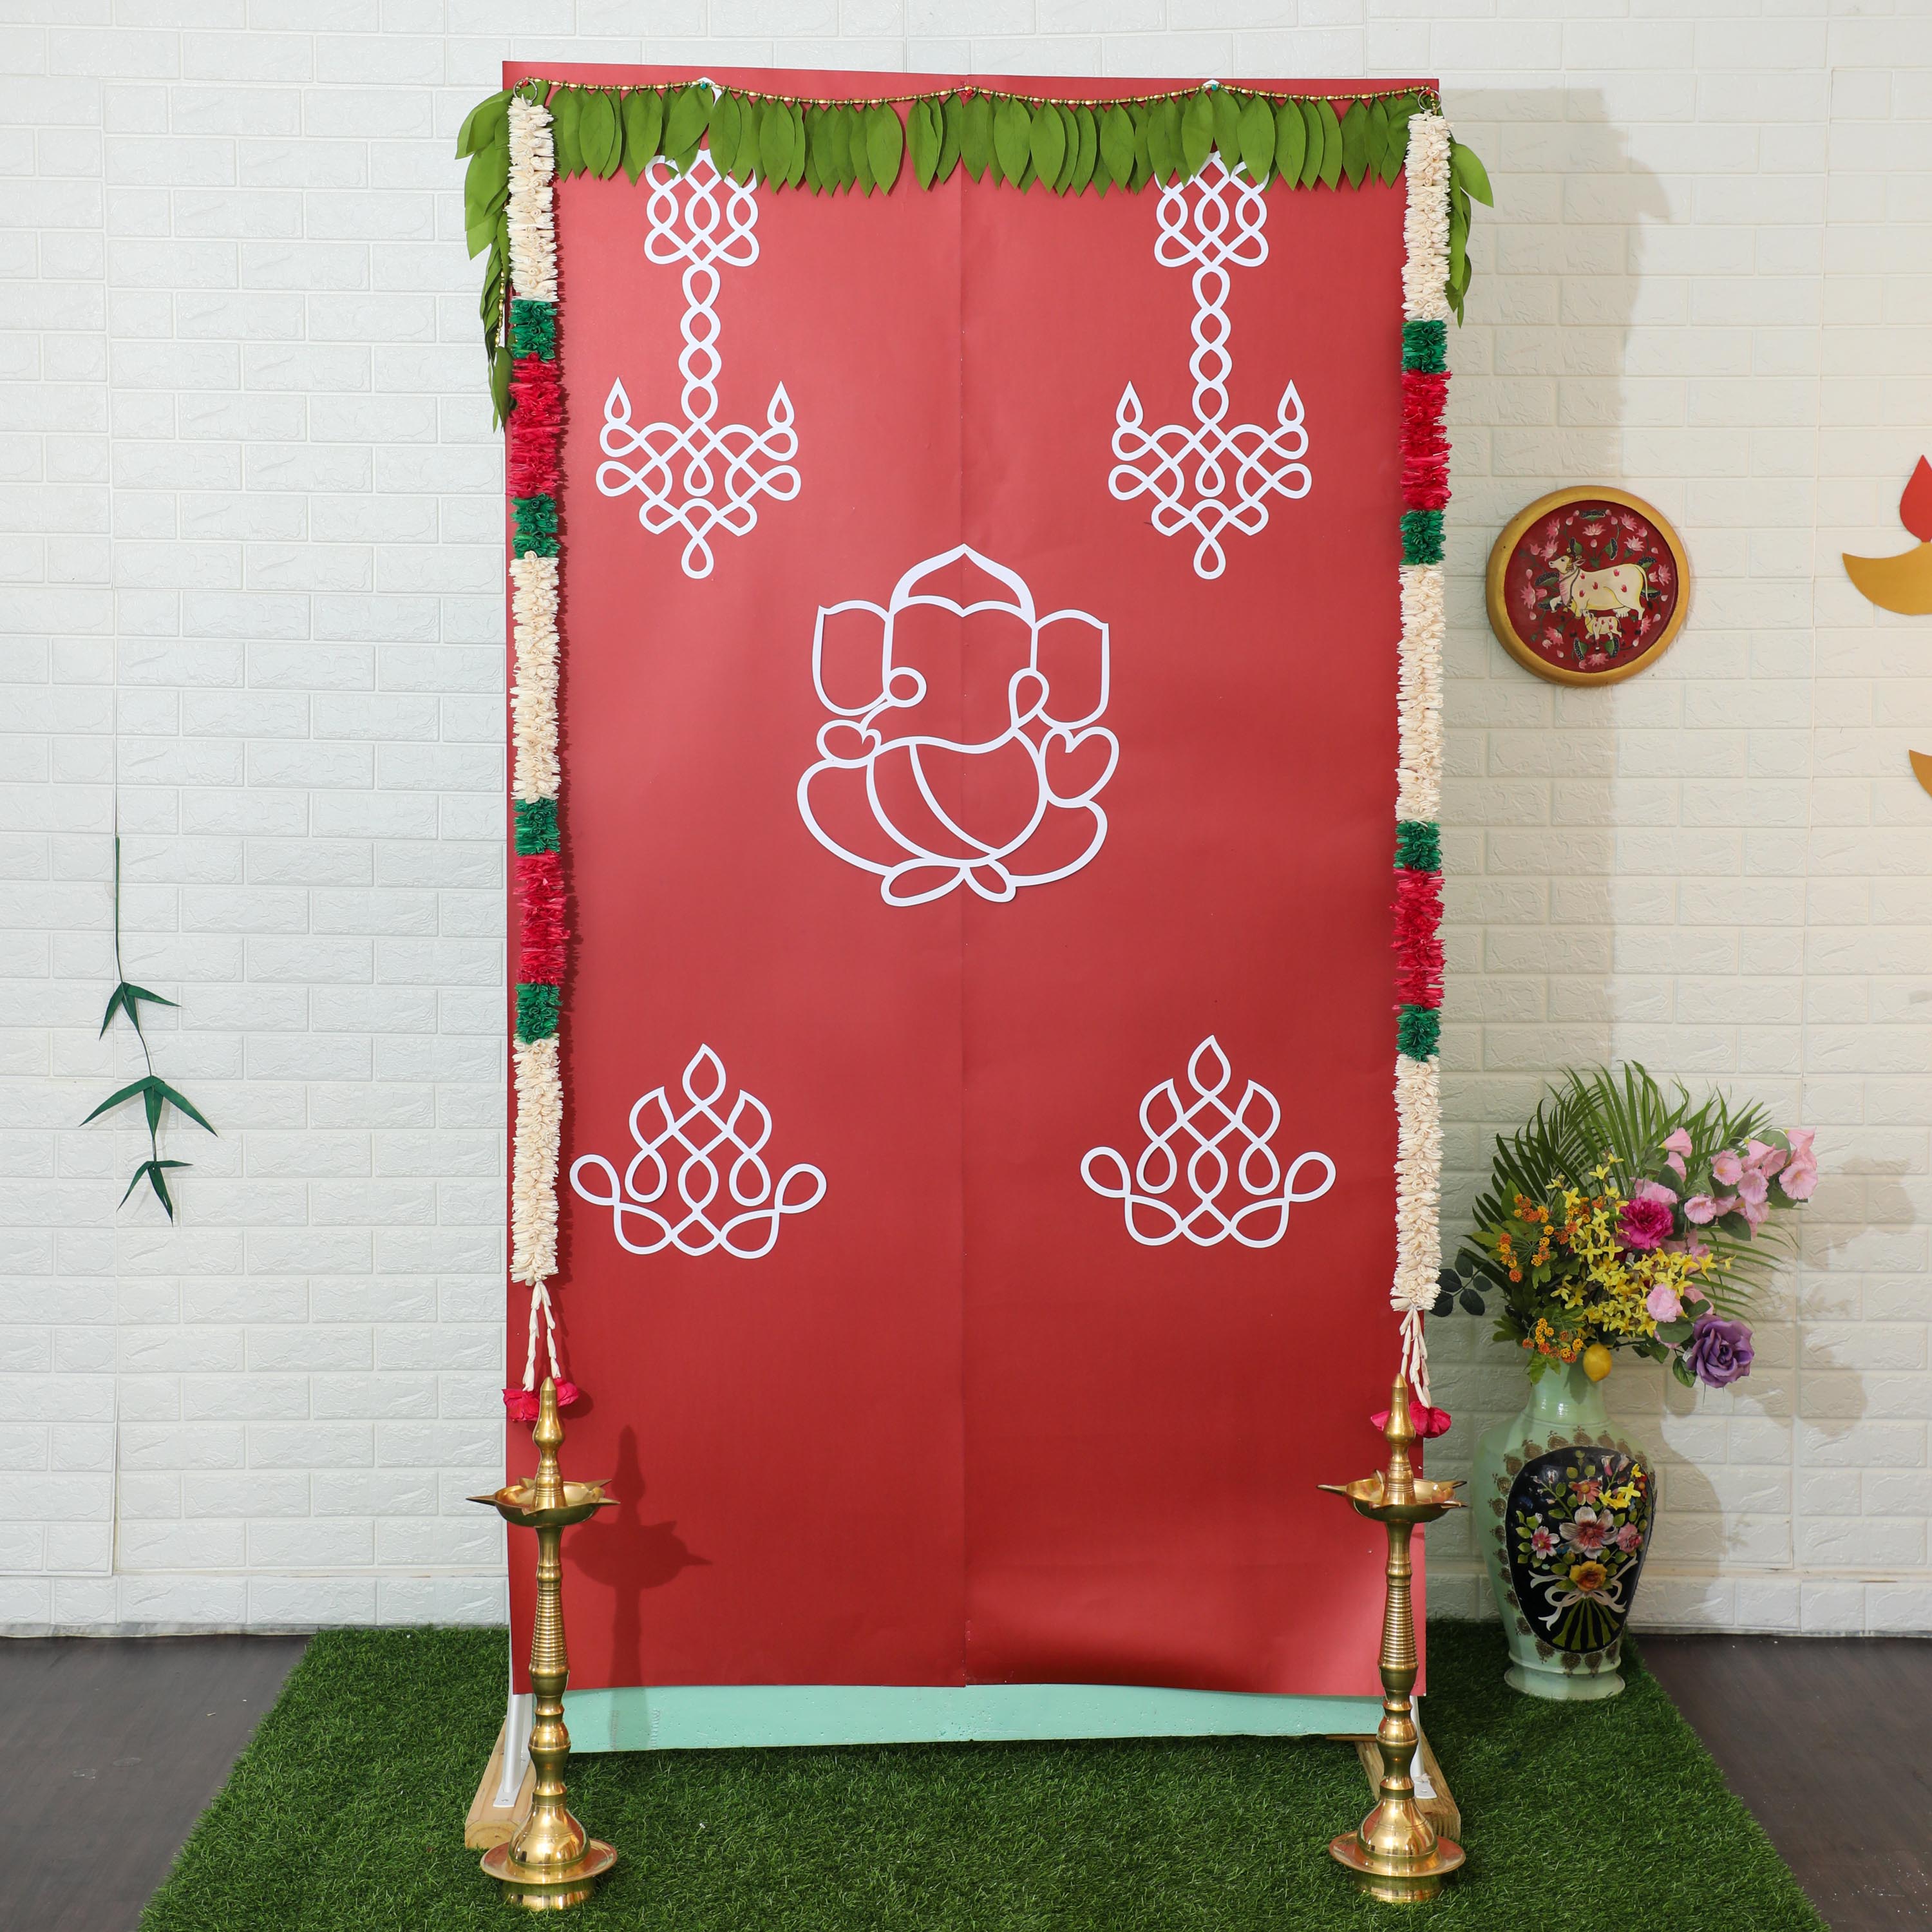 Ganesh Deepam Backdrop Kit for Indian Decoration online in the USA